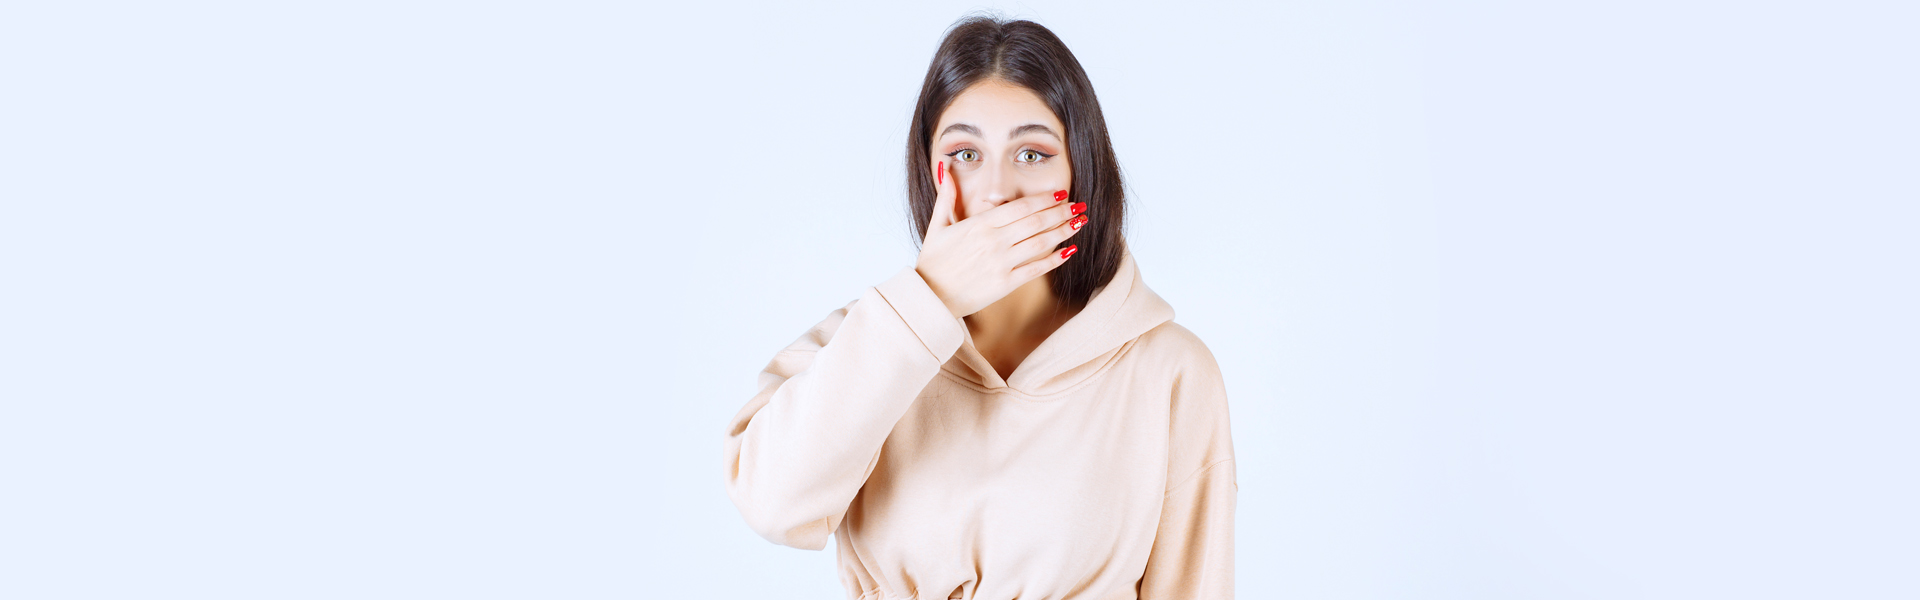 Why Does My Breath Smell Bad, And What Can I Do About It?